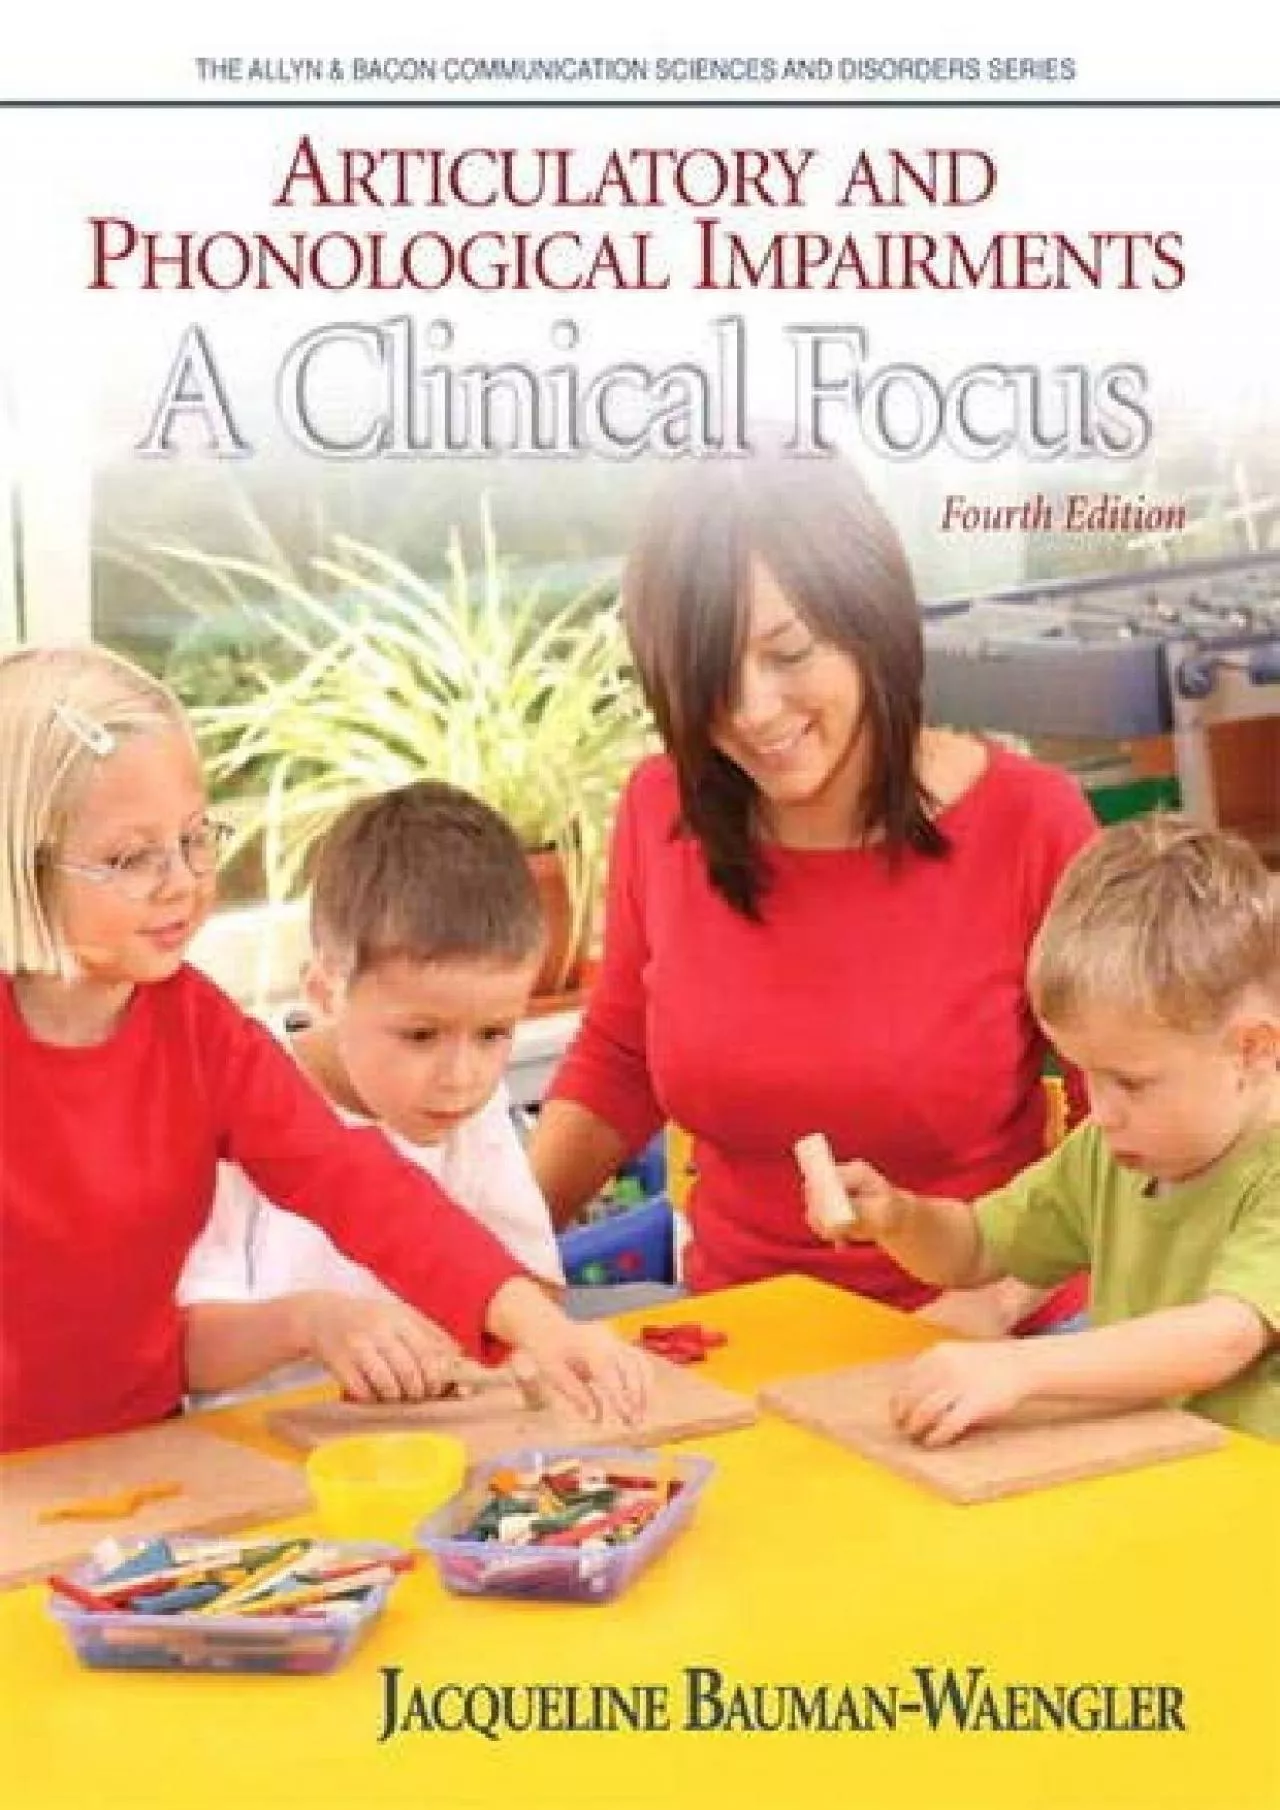 (DOWNLOAD)-Articulatory and Phonological Impairments: A Clinical Focus (4th Edition) (Allyn